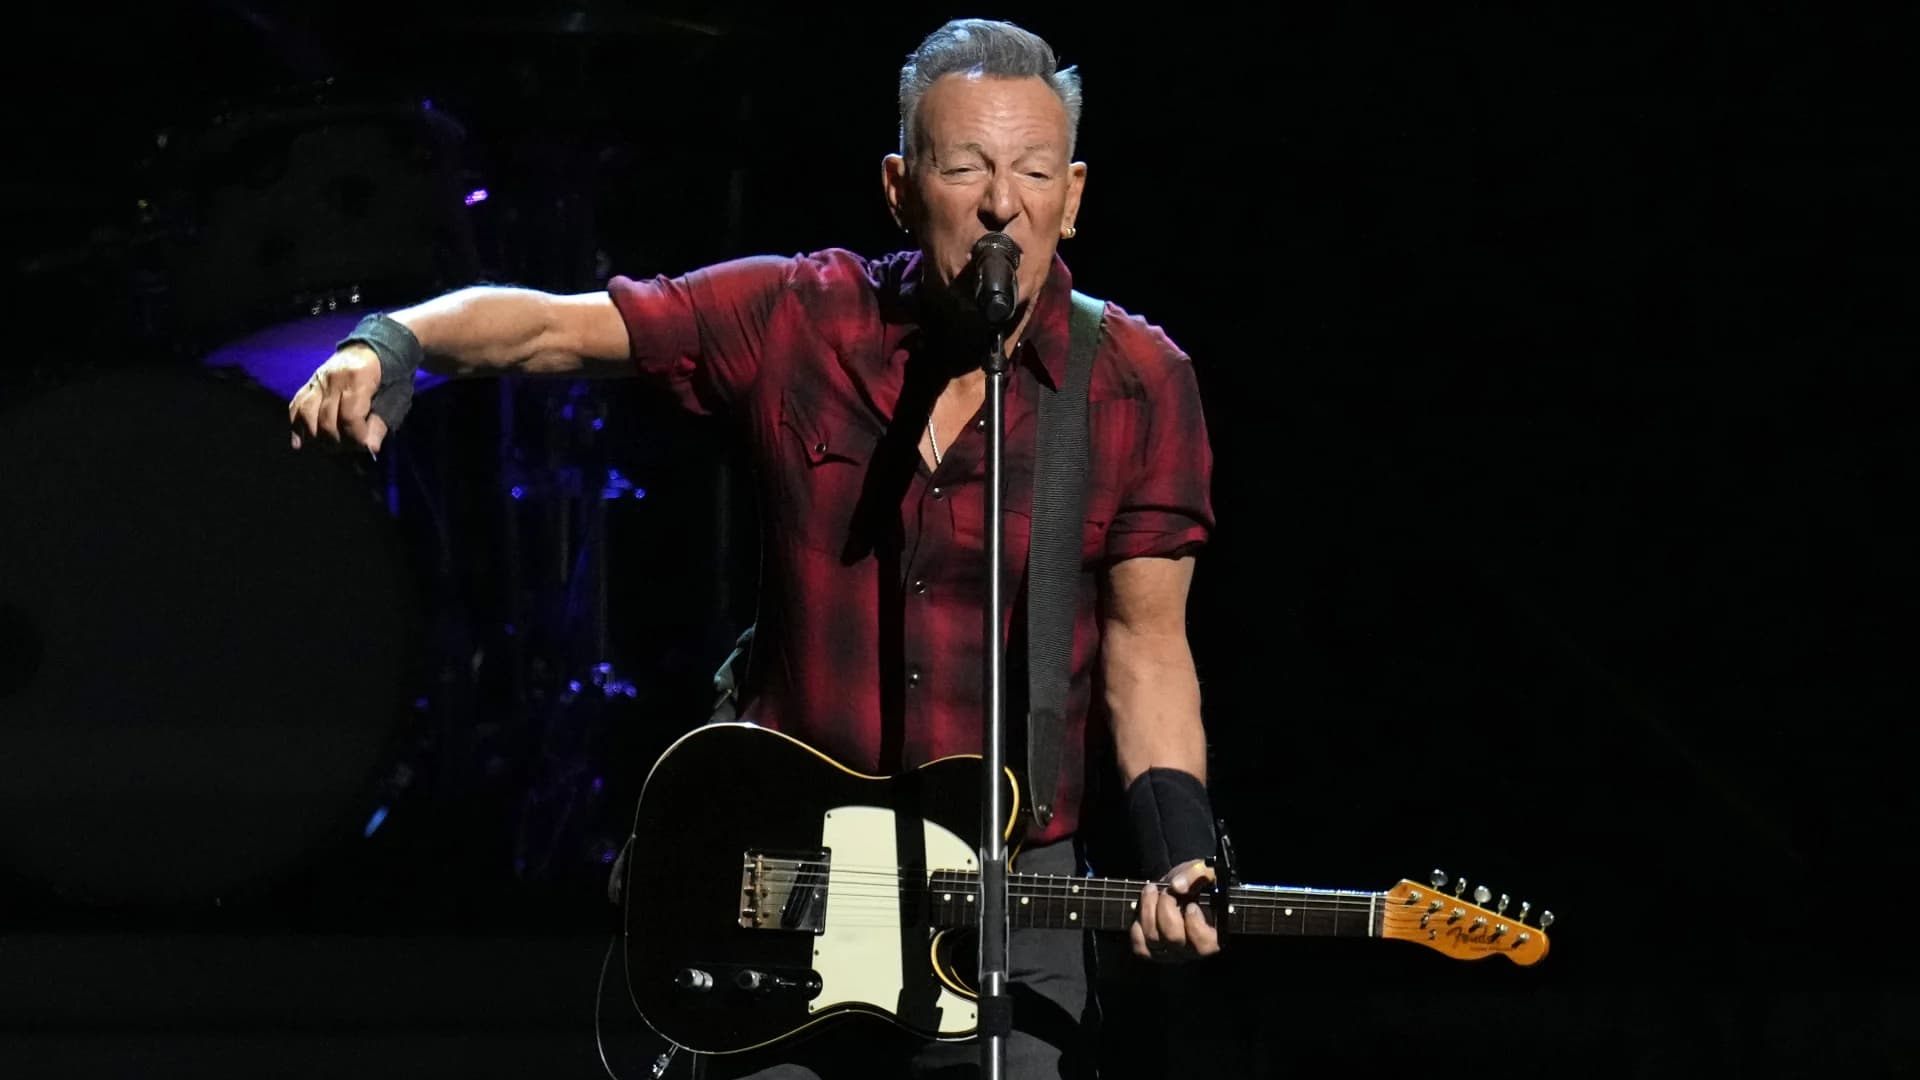 Bruce Springsteen returns to the stage after health issues postponed his 2023 world tour